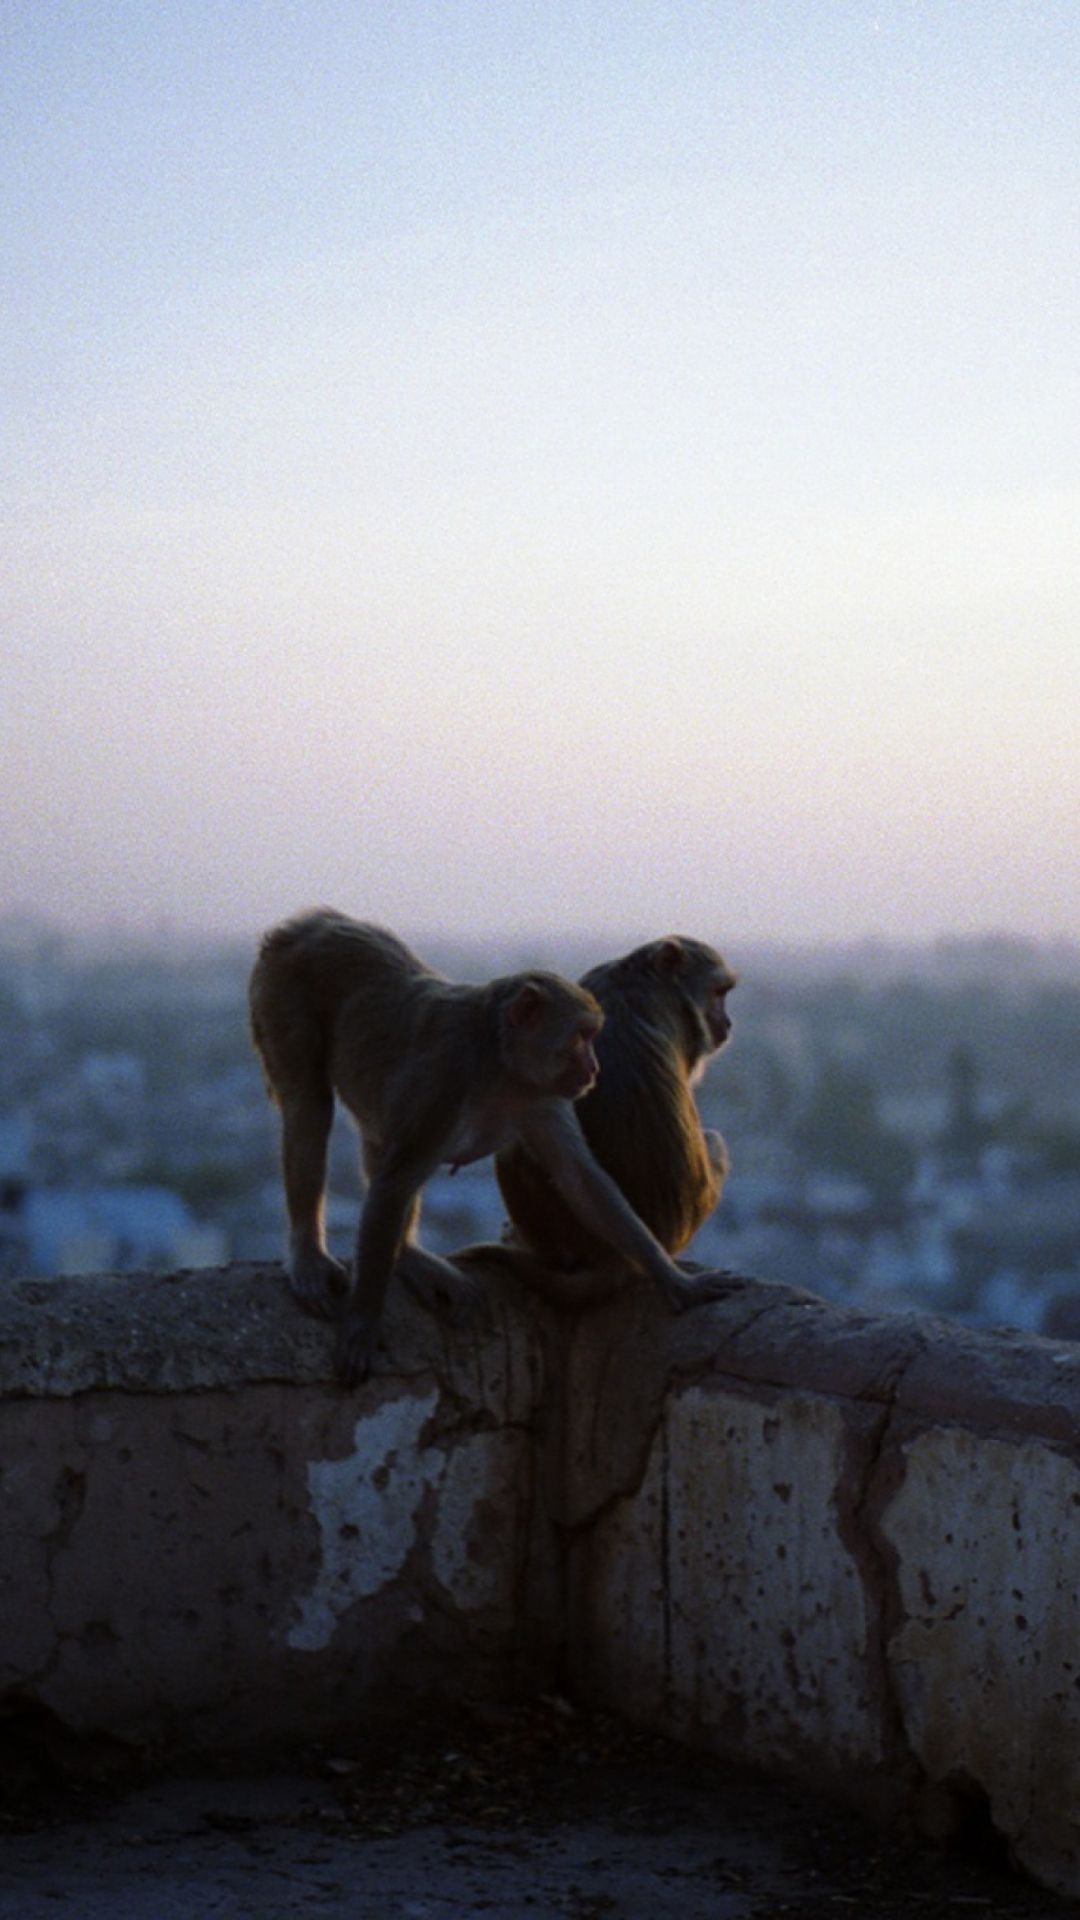 Monkey On The Roof